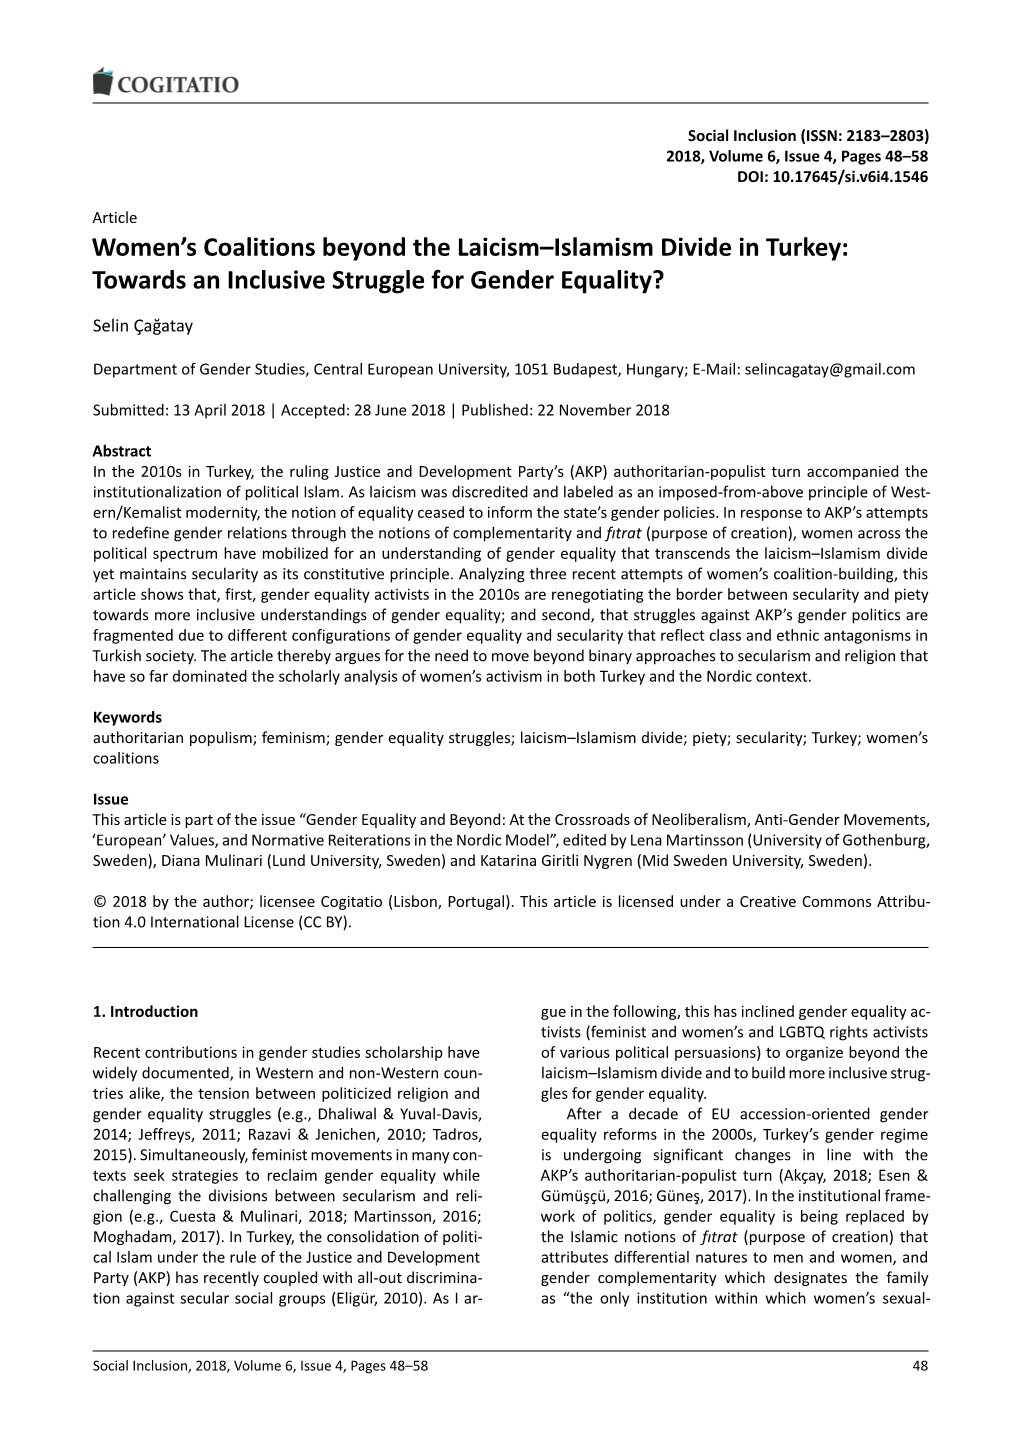 Women's Coalitions Beyond the Laicism–Islamism Divide in Turkey: Towards an Inclusive Struggle for Gender Equality?